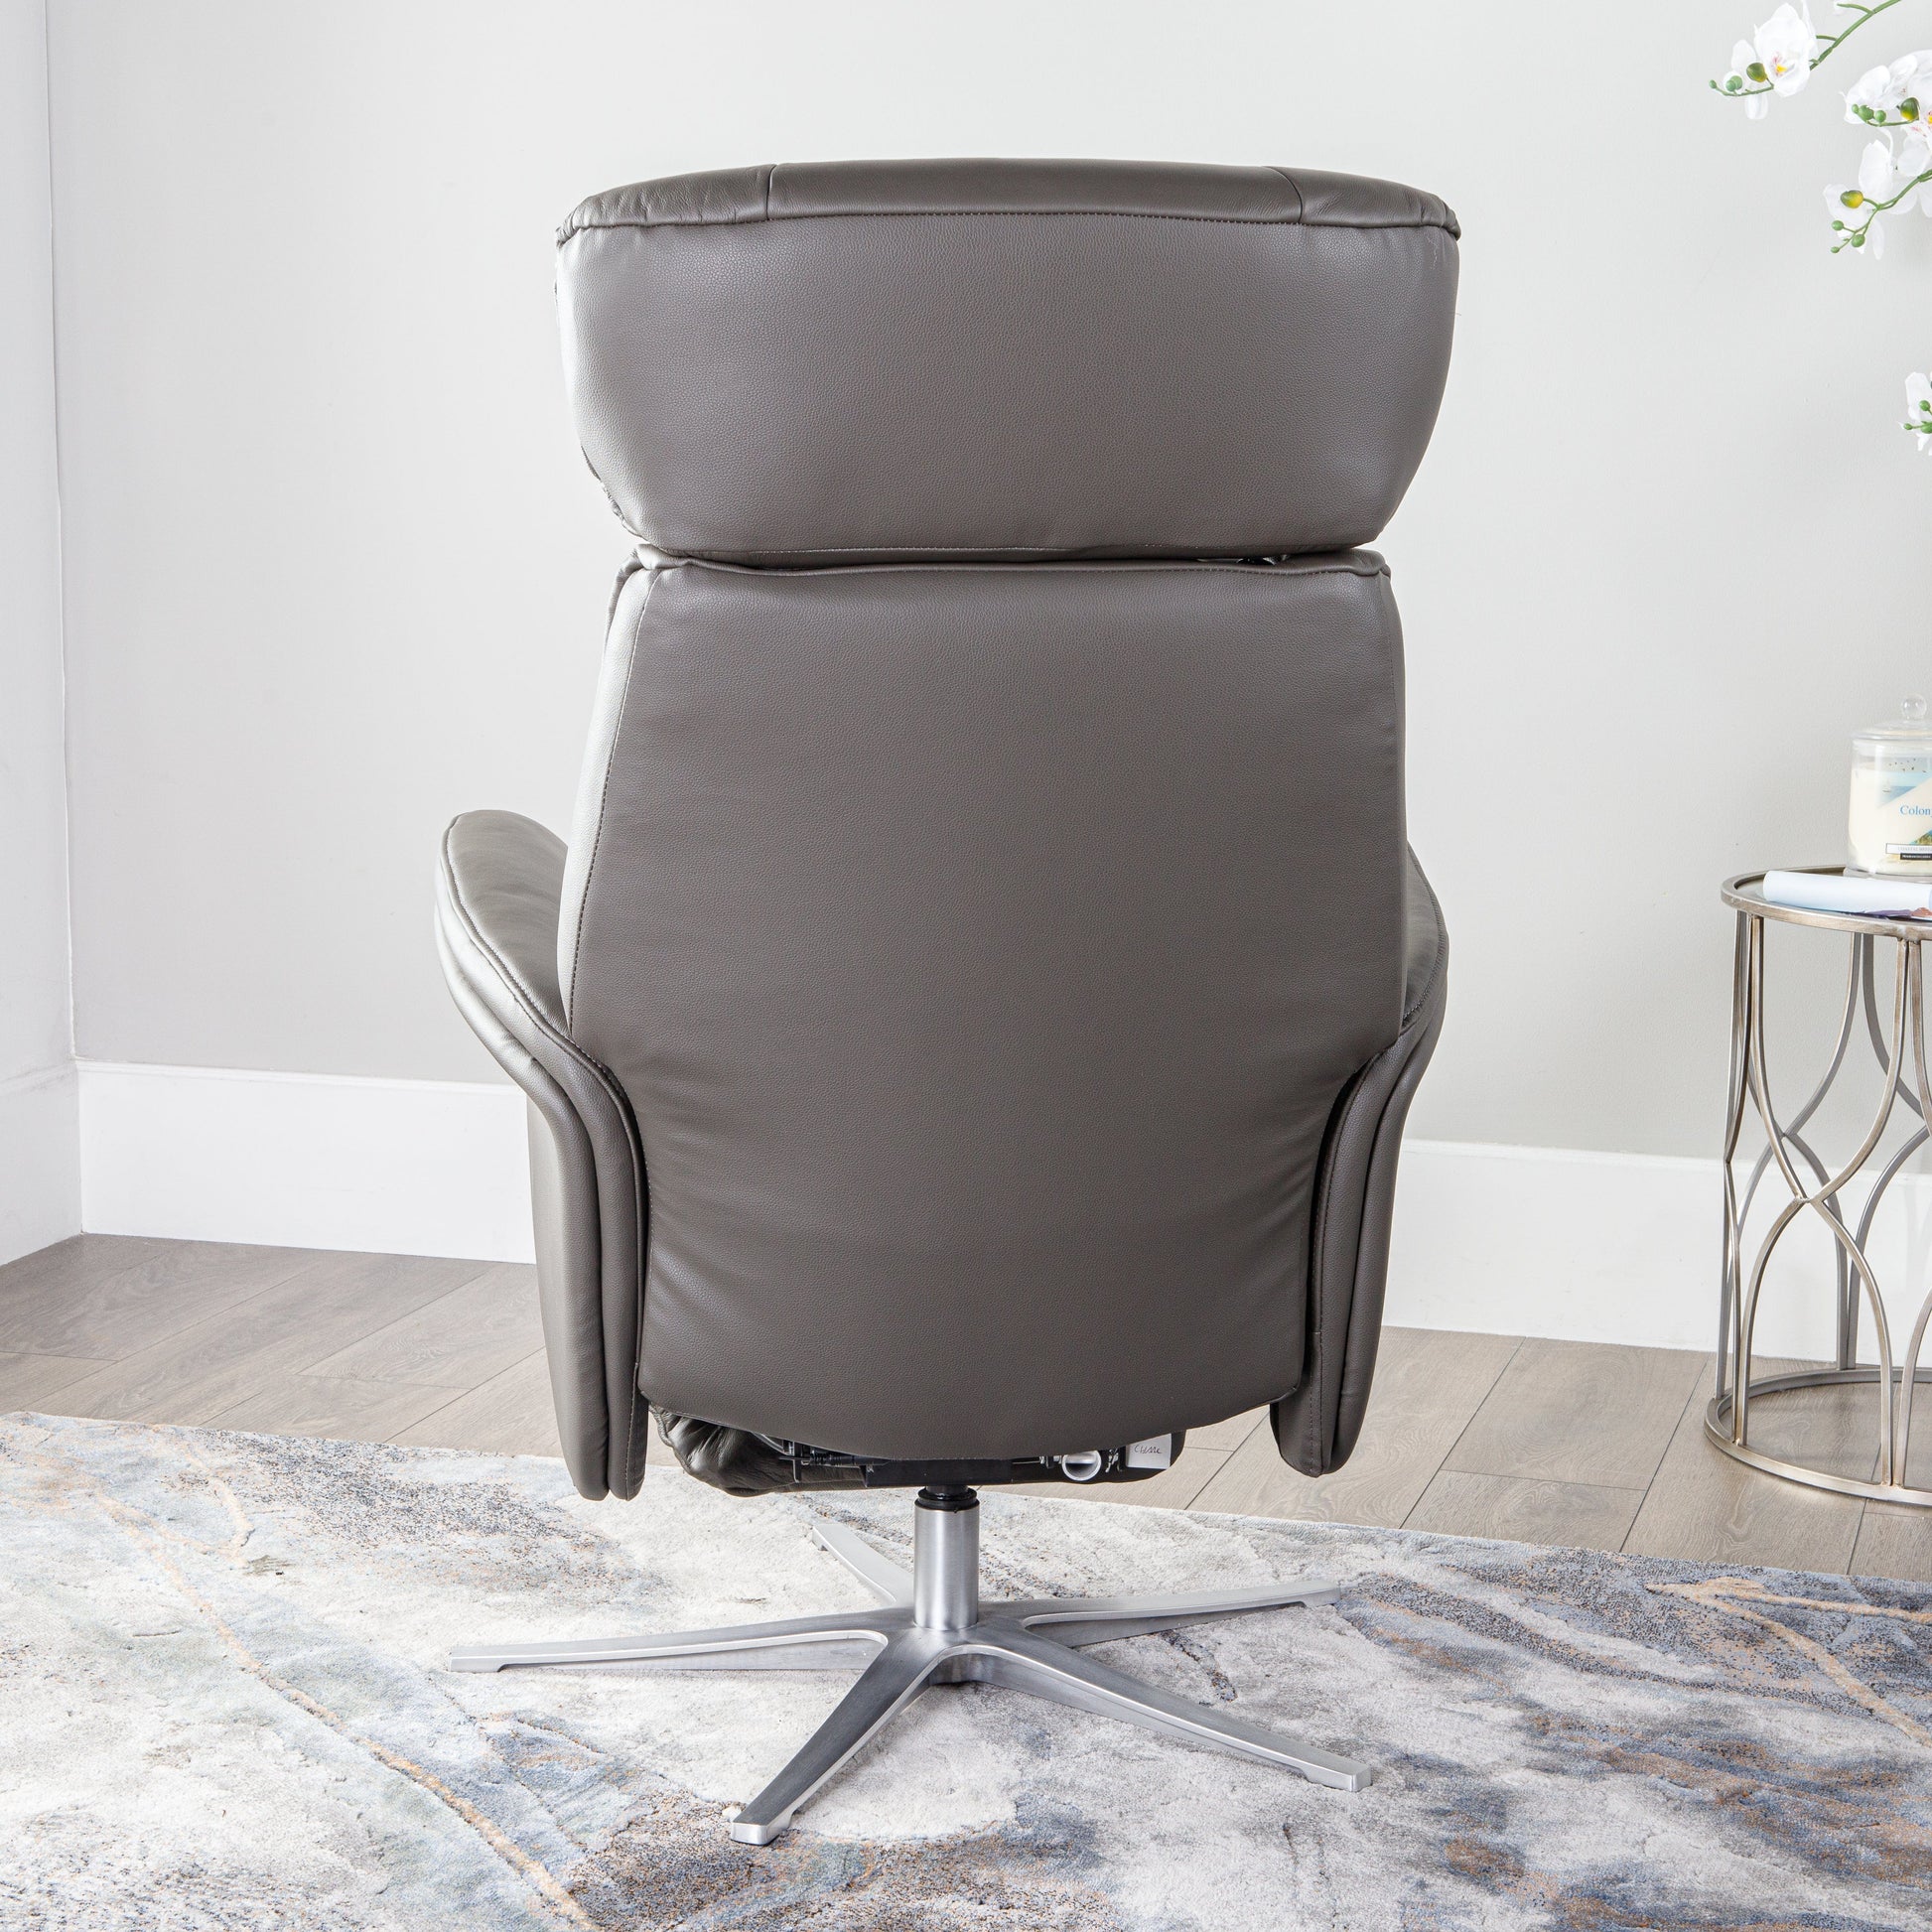 Furniture  -  Detroit Charcoal Leather Electric Reclining Chair  -  60004236